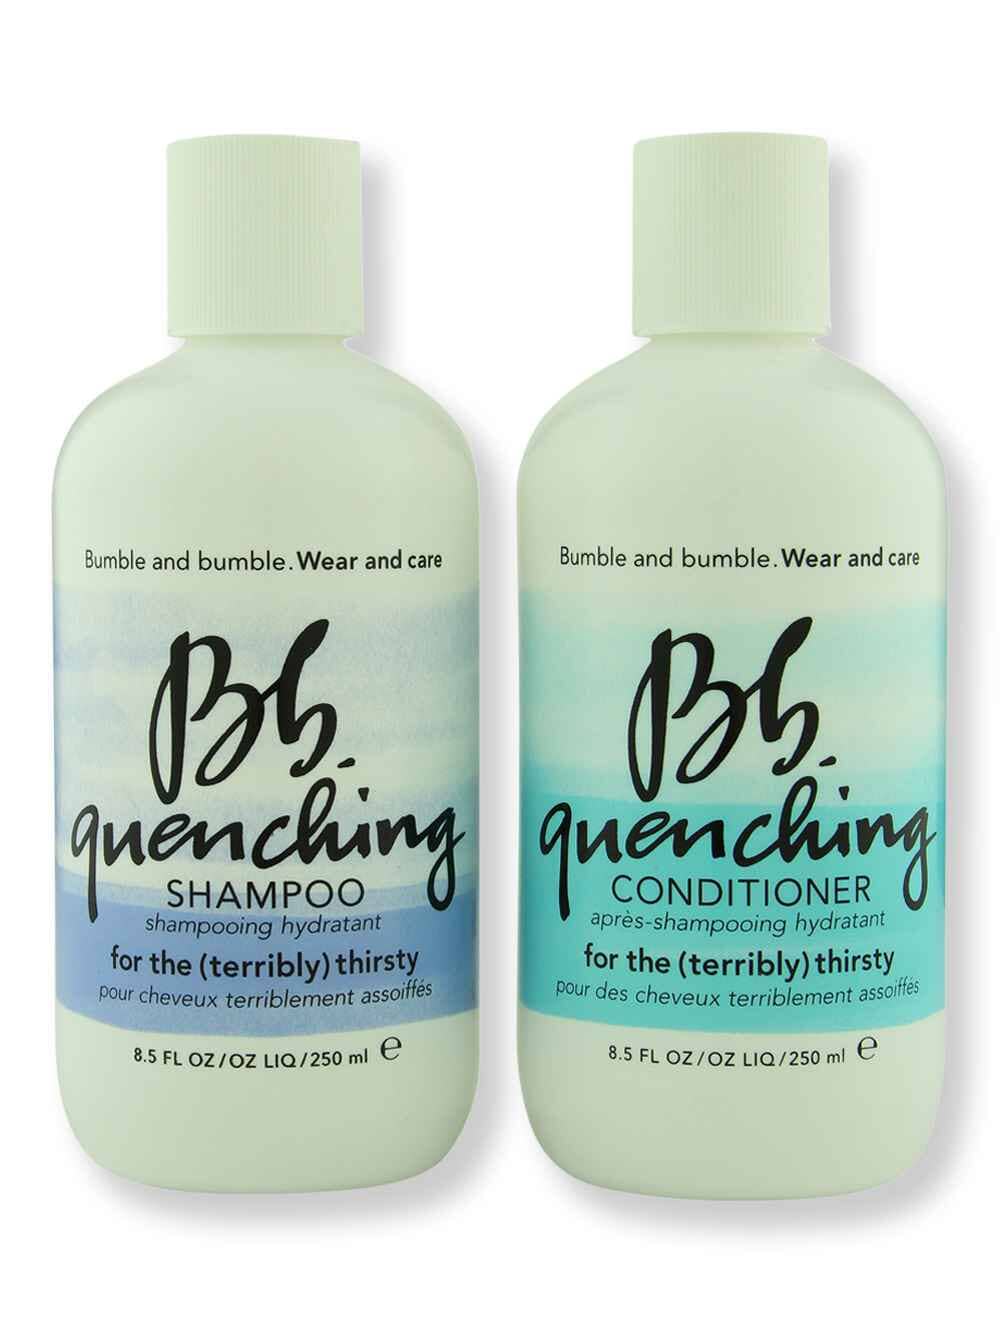 Bumble and bumble Bumble and bumble Quenching Shampoo & Conditioner 8.5 oz Hair Care Value Sets 